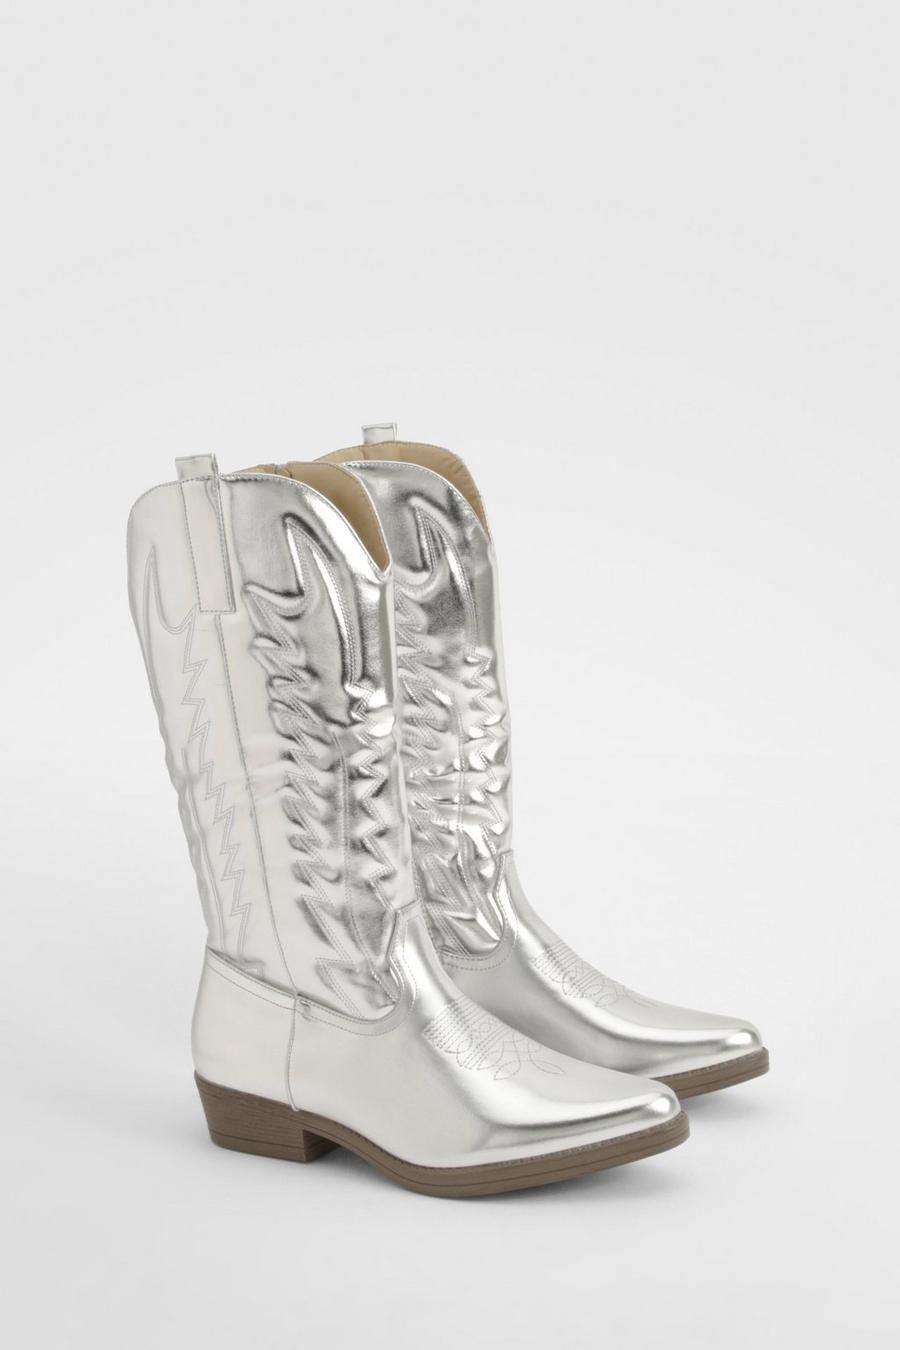 Silver Metallic Embroidered Detail Western Cowboy Boots   